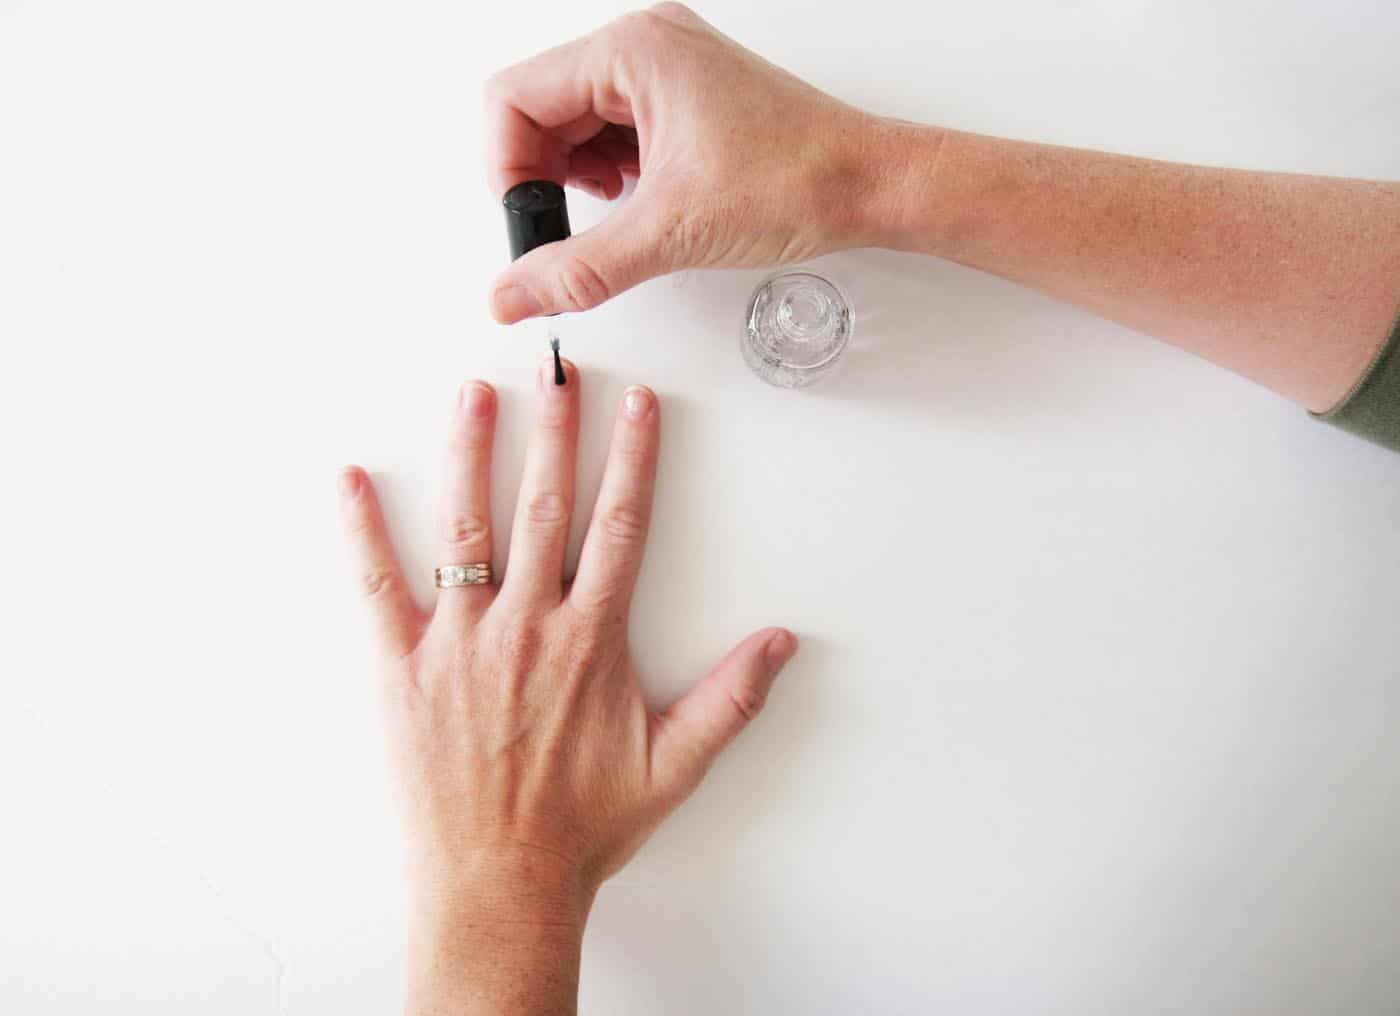 Painting a clear base coat onto nails